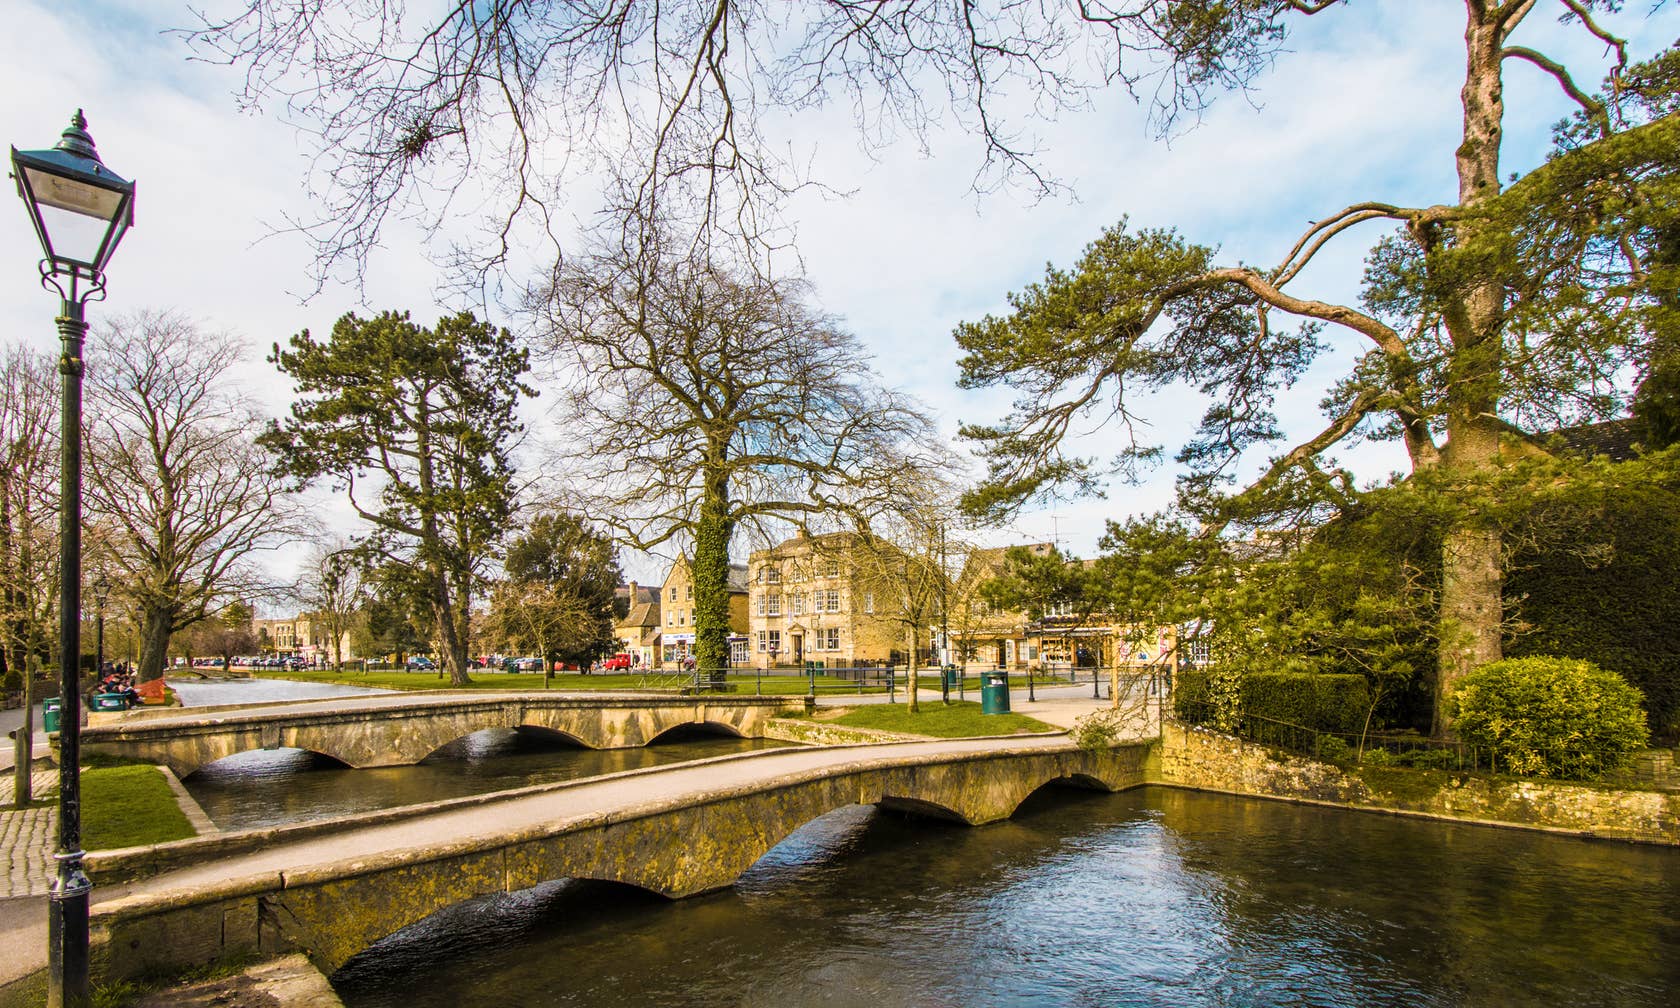 Bourton-on-the-Water vacation rentals